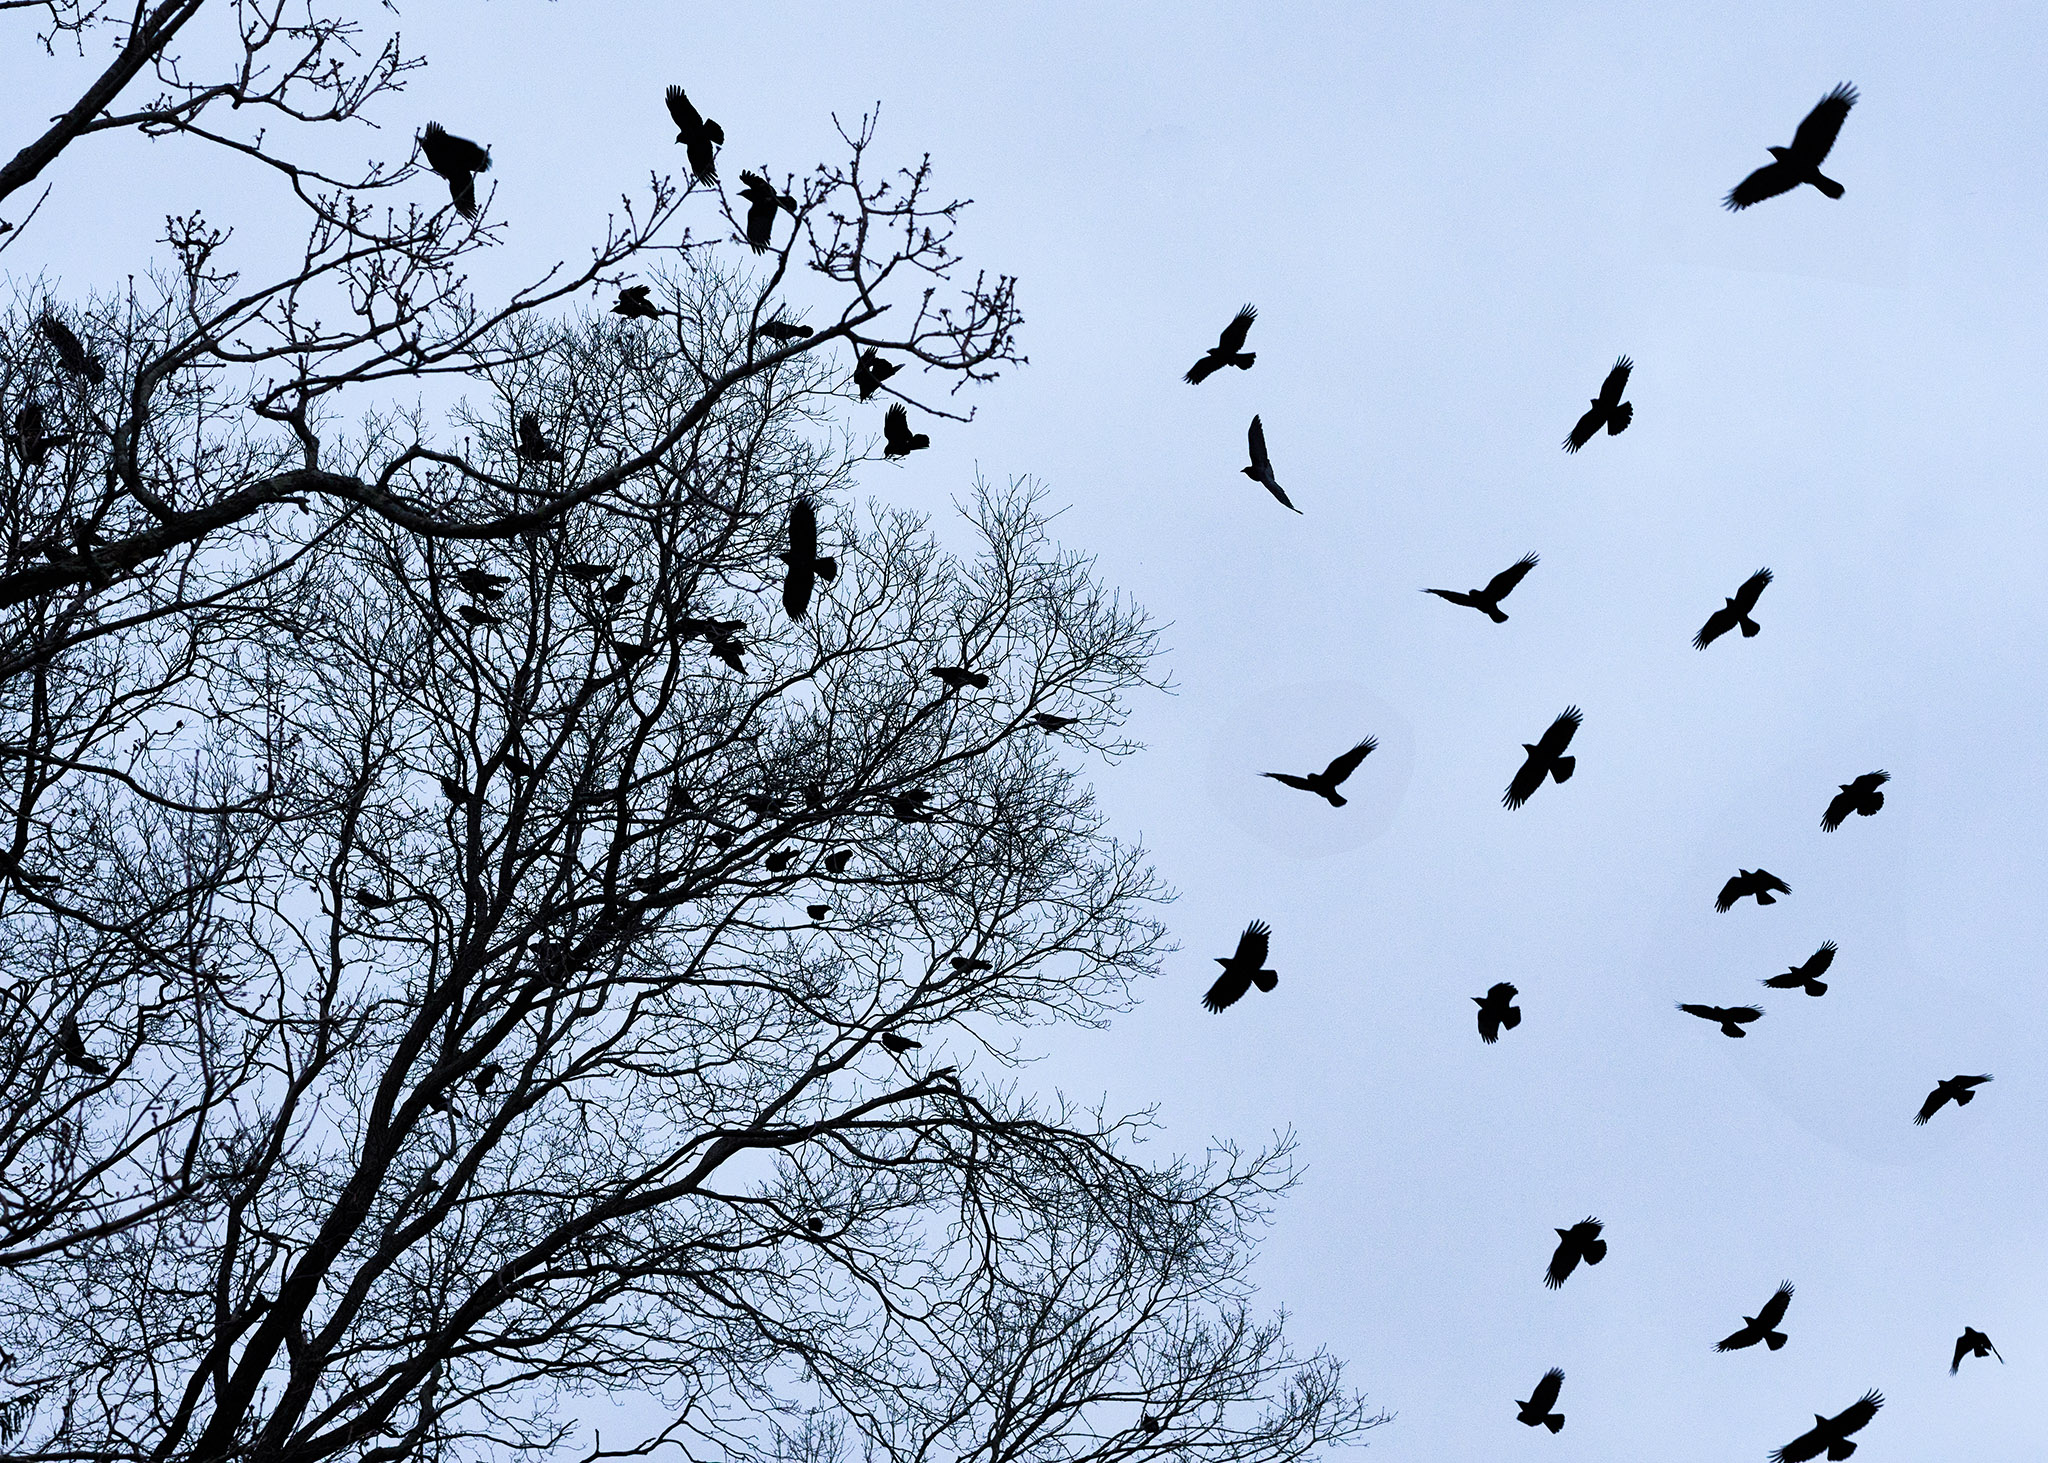 A flock of crows is silhouetted against a gray sky as they fly into a bare-branched tree to roost. (photo © Steve Nelson via the Flickr Creative Commons)